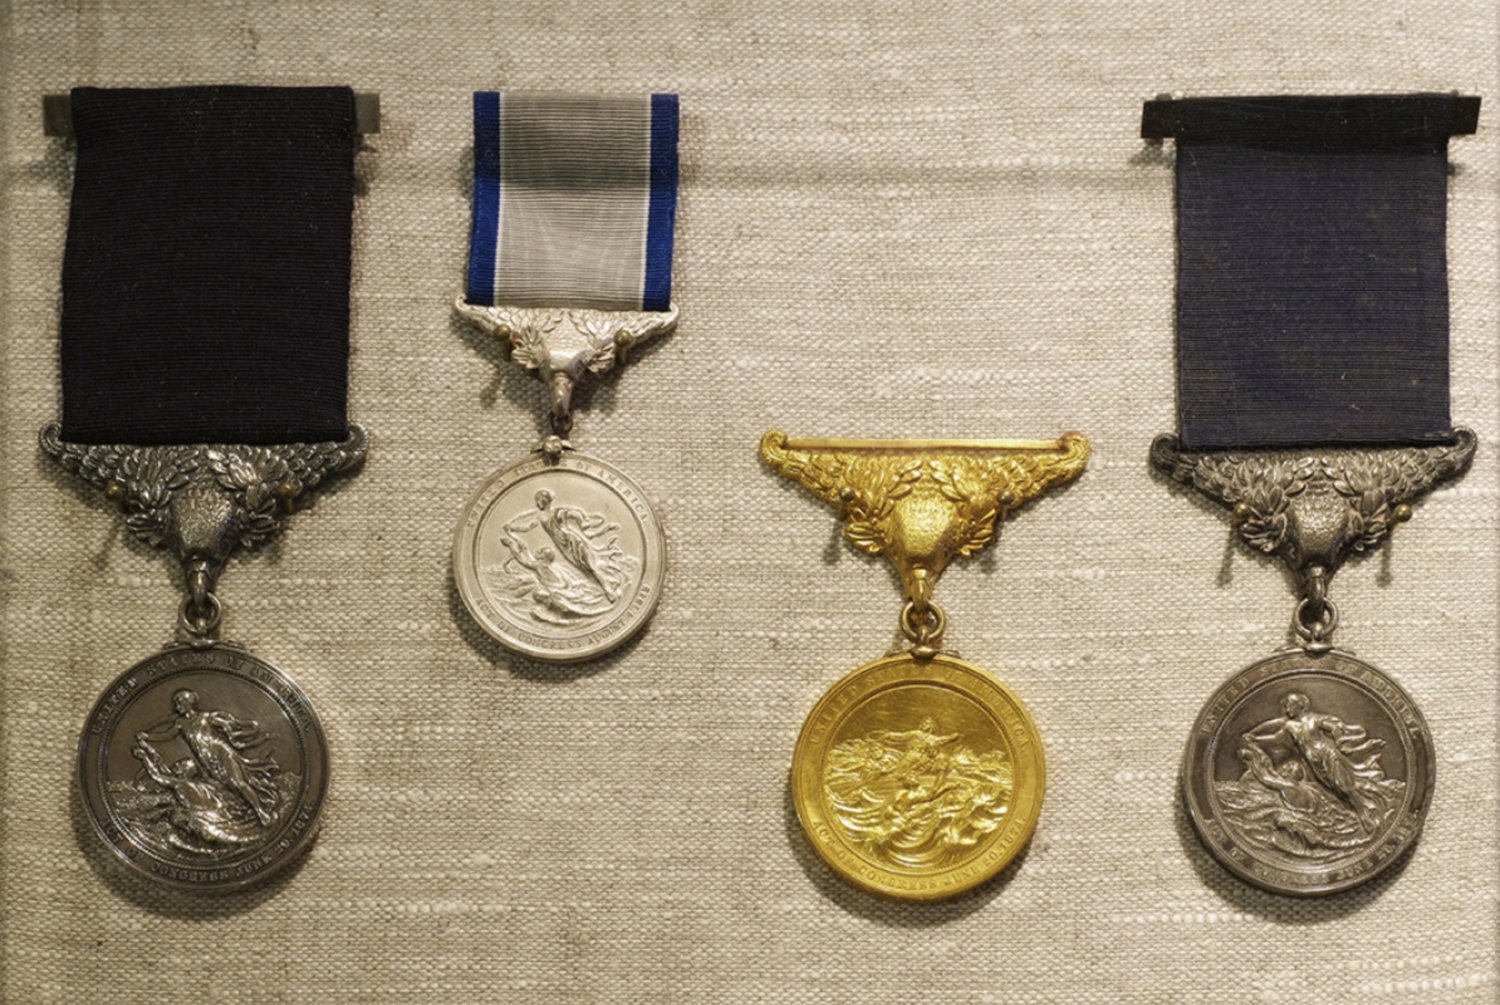 Medals awarded to to the crew of the Coskata Life-Saving Station for their efforts to rescue the crew of the H.P. Kirkham.